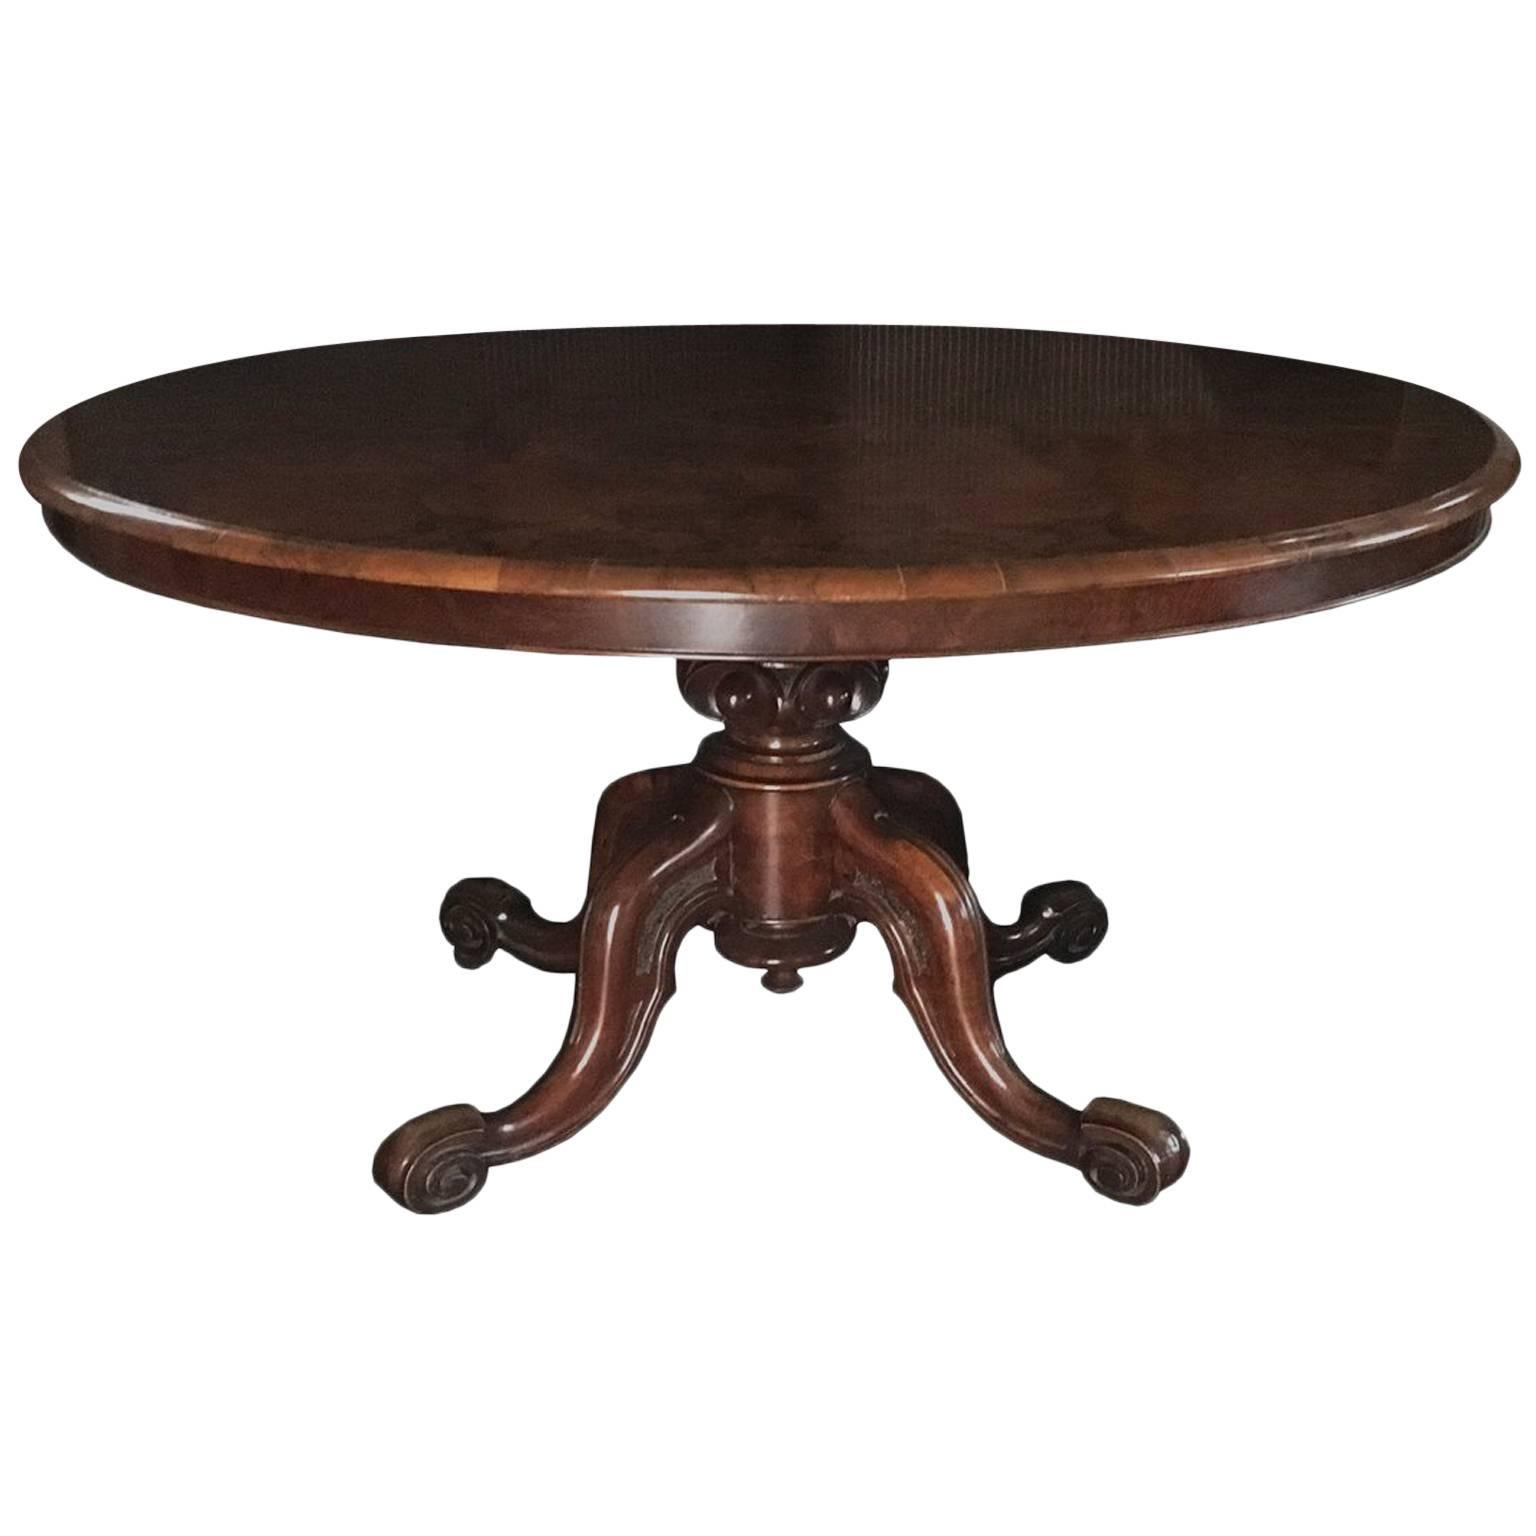 London Mid-19th Century Oval Walnut Tip Top Table by T H Filmer & Sons For Sale